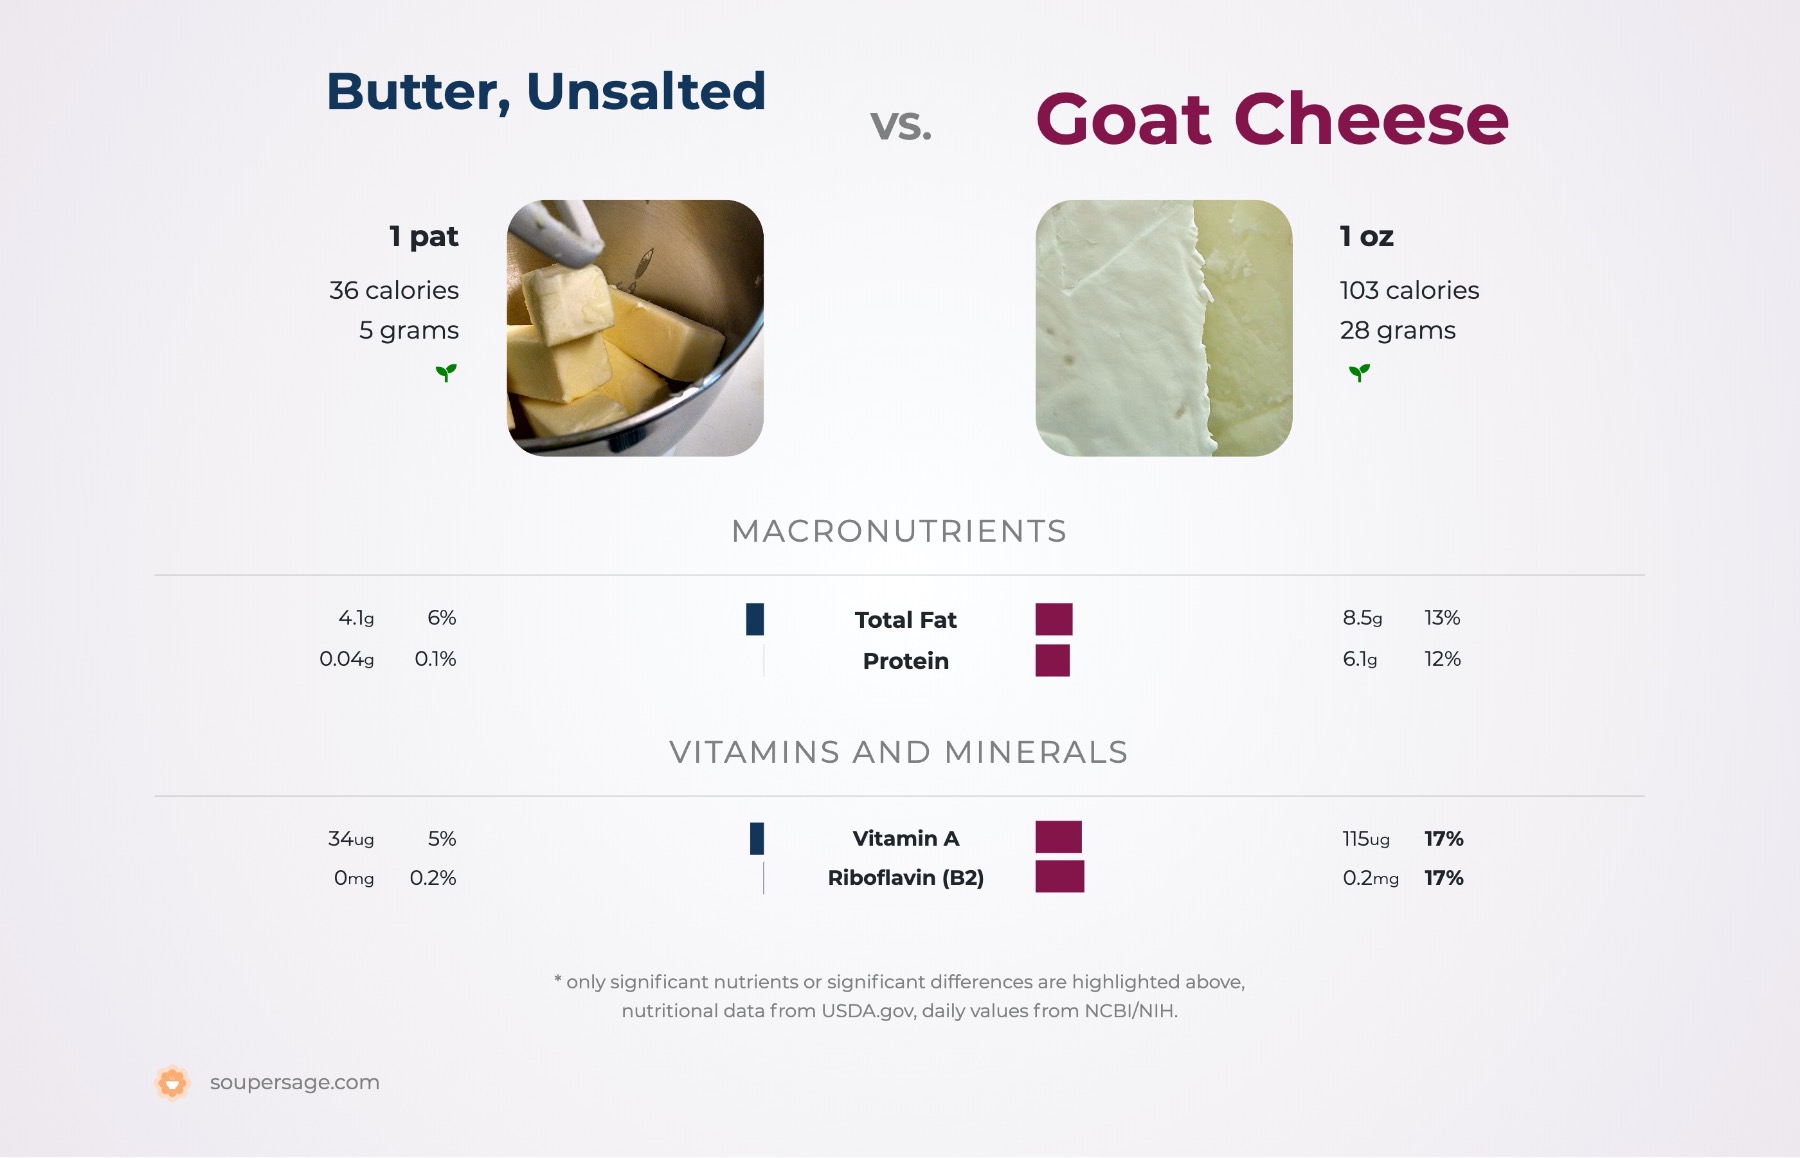 nutrition comparison of butter, unsalted vs. goat cheese